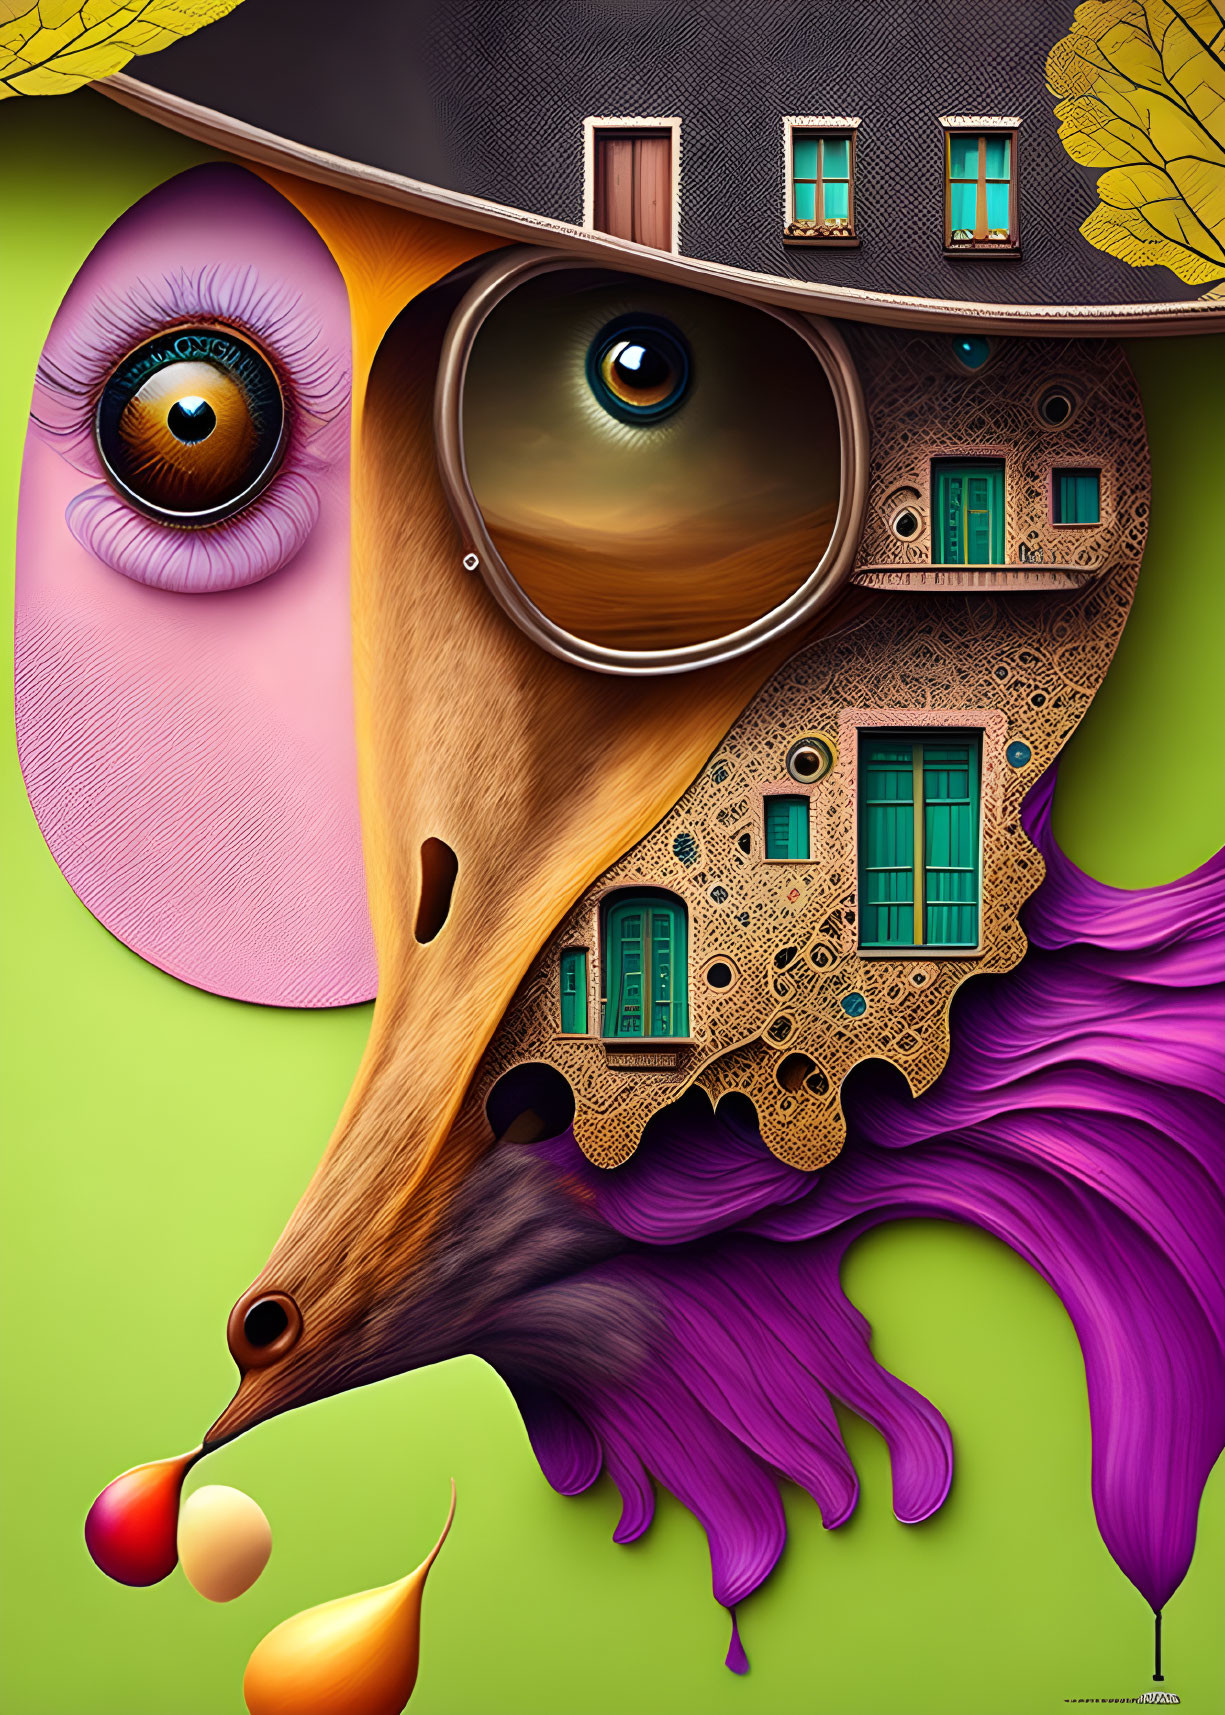 Surreal eye art: colorful landscape with house, windows, doors, tree details